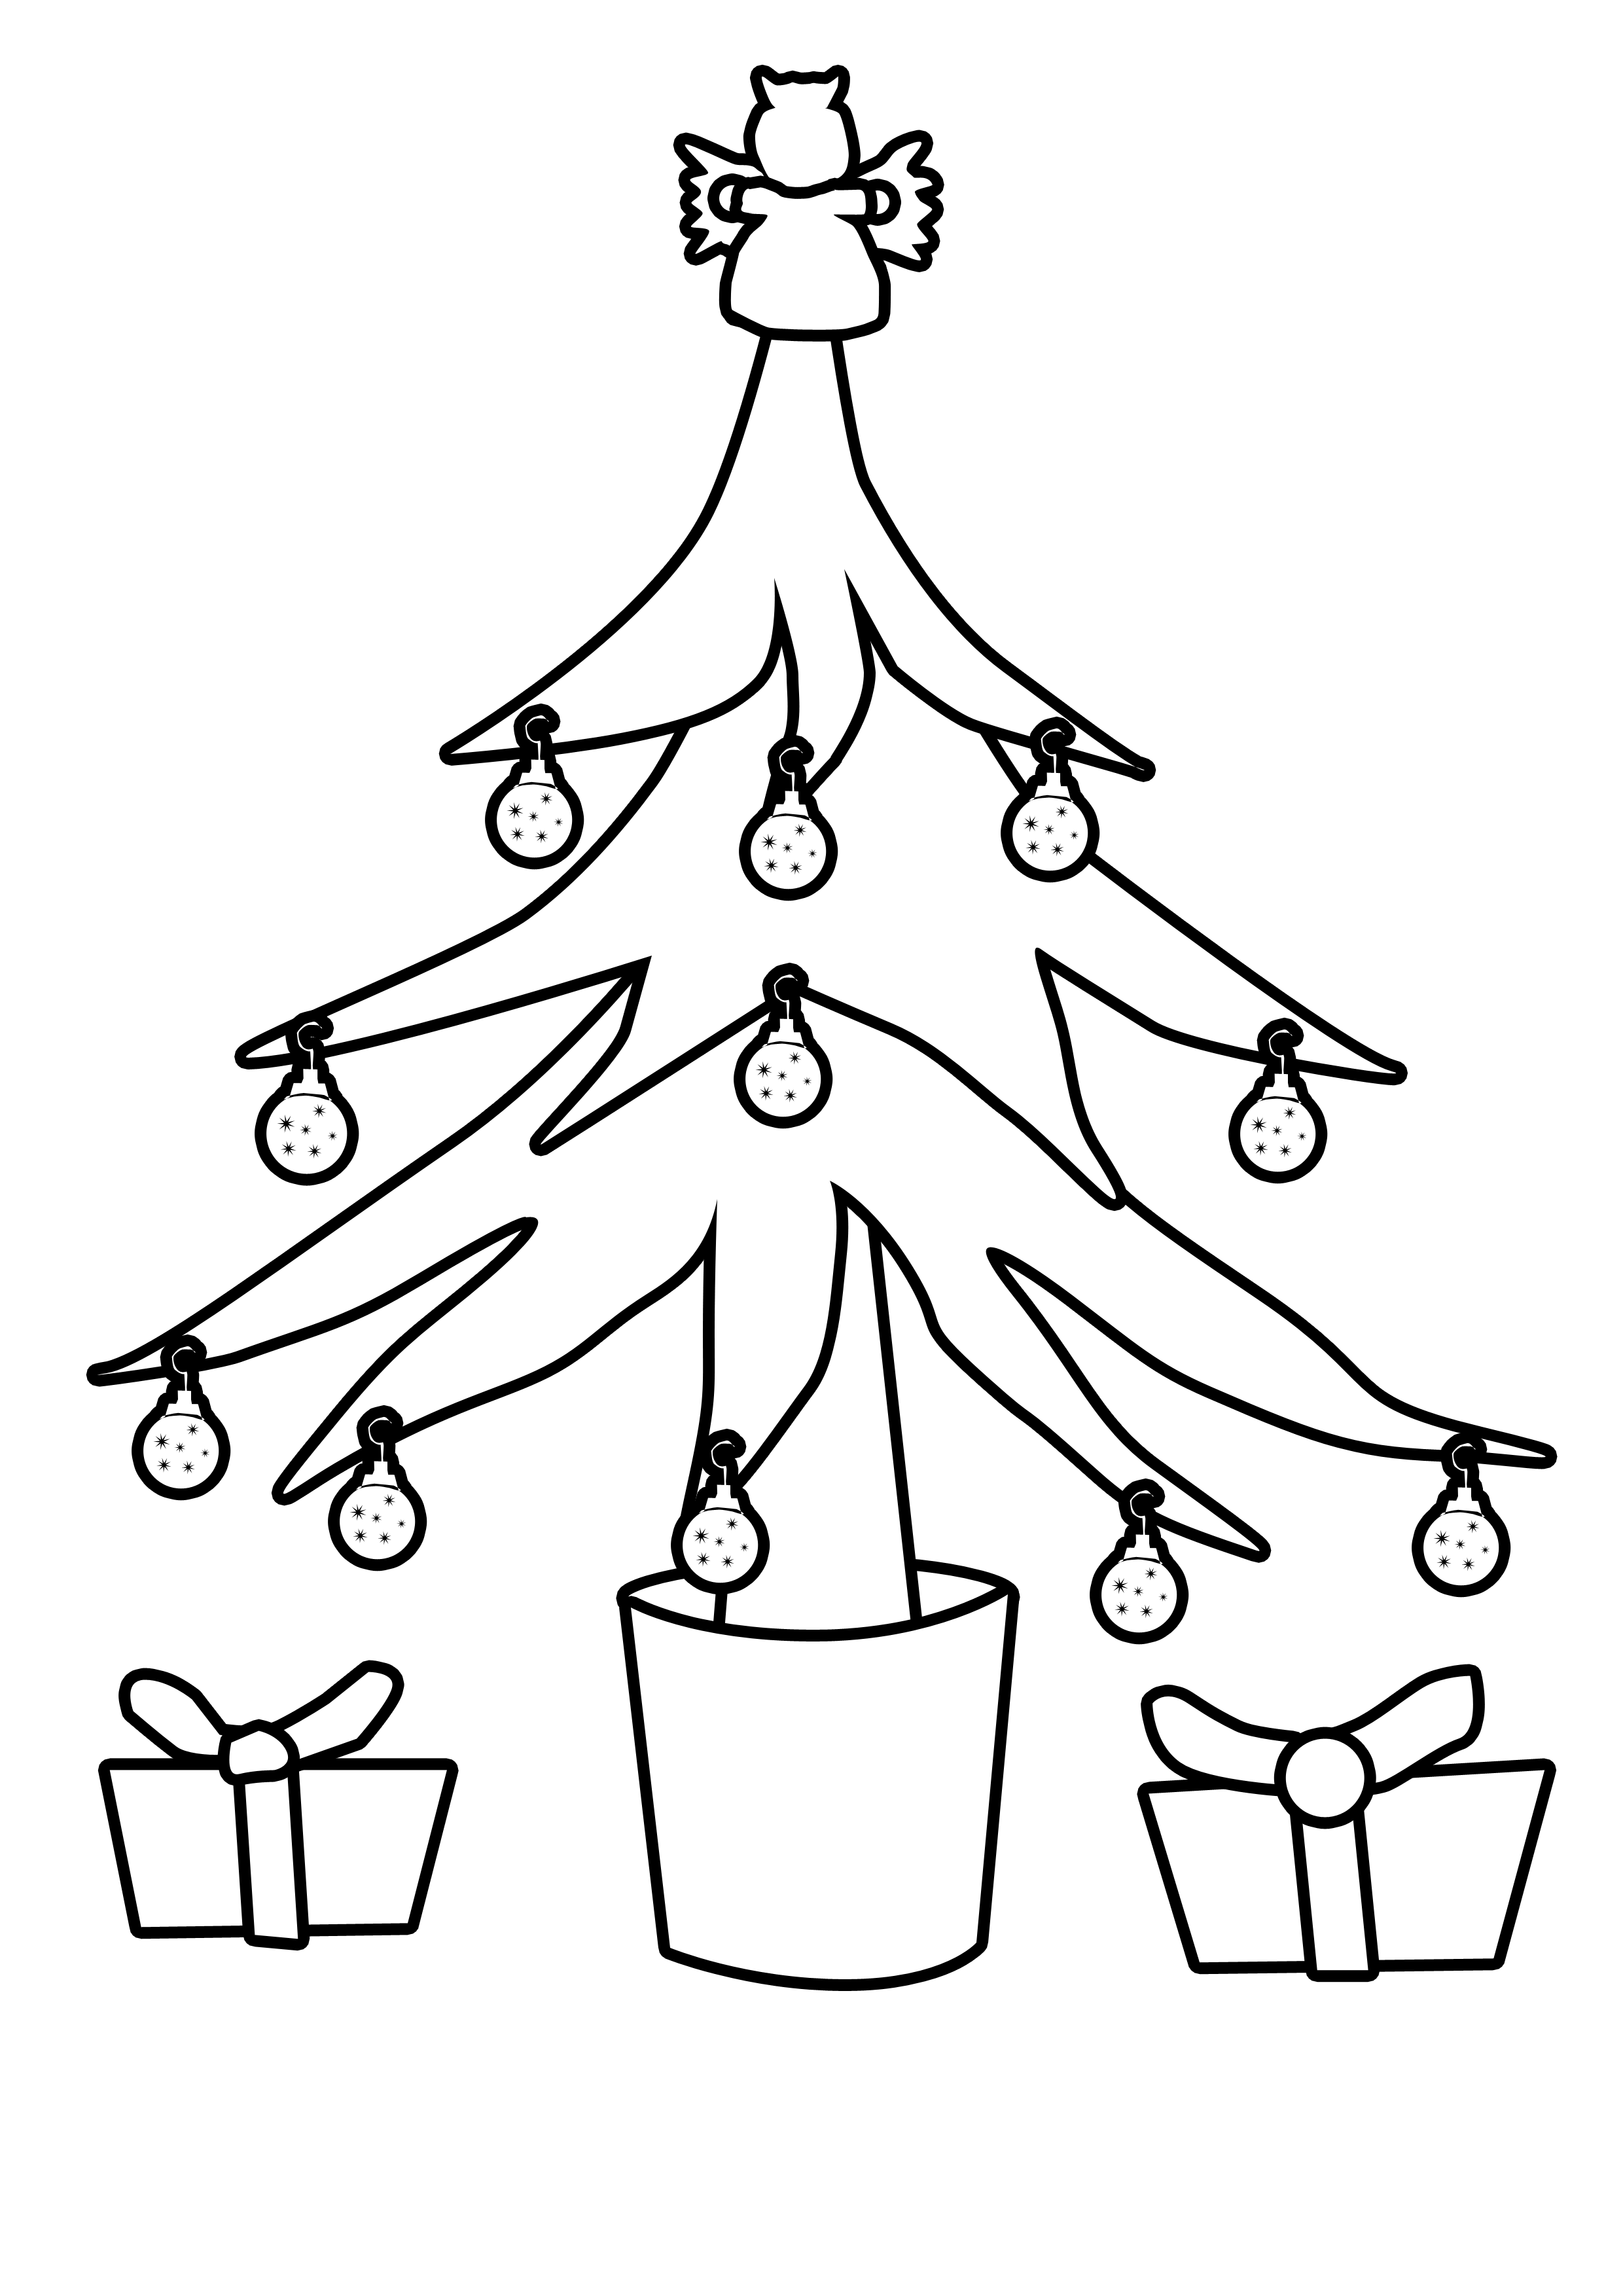 Clip Art Christmas Tree Outline | Clipart library - Free Clipart Images